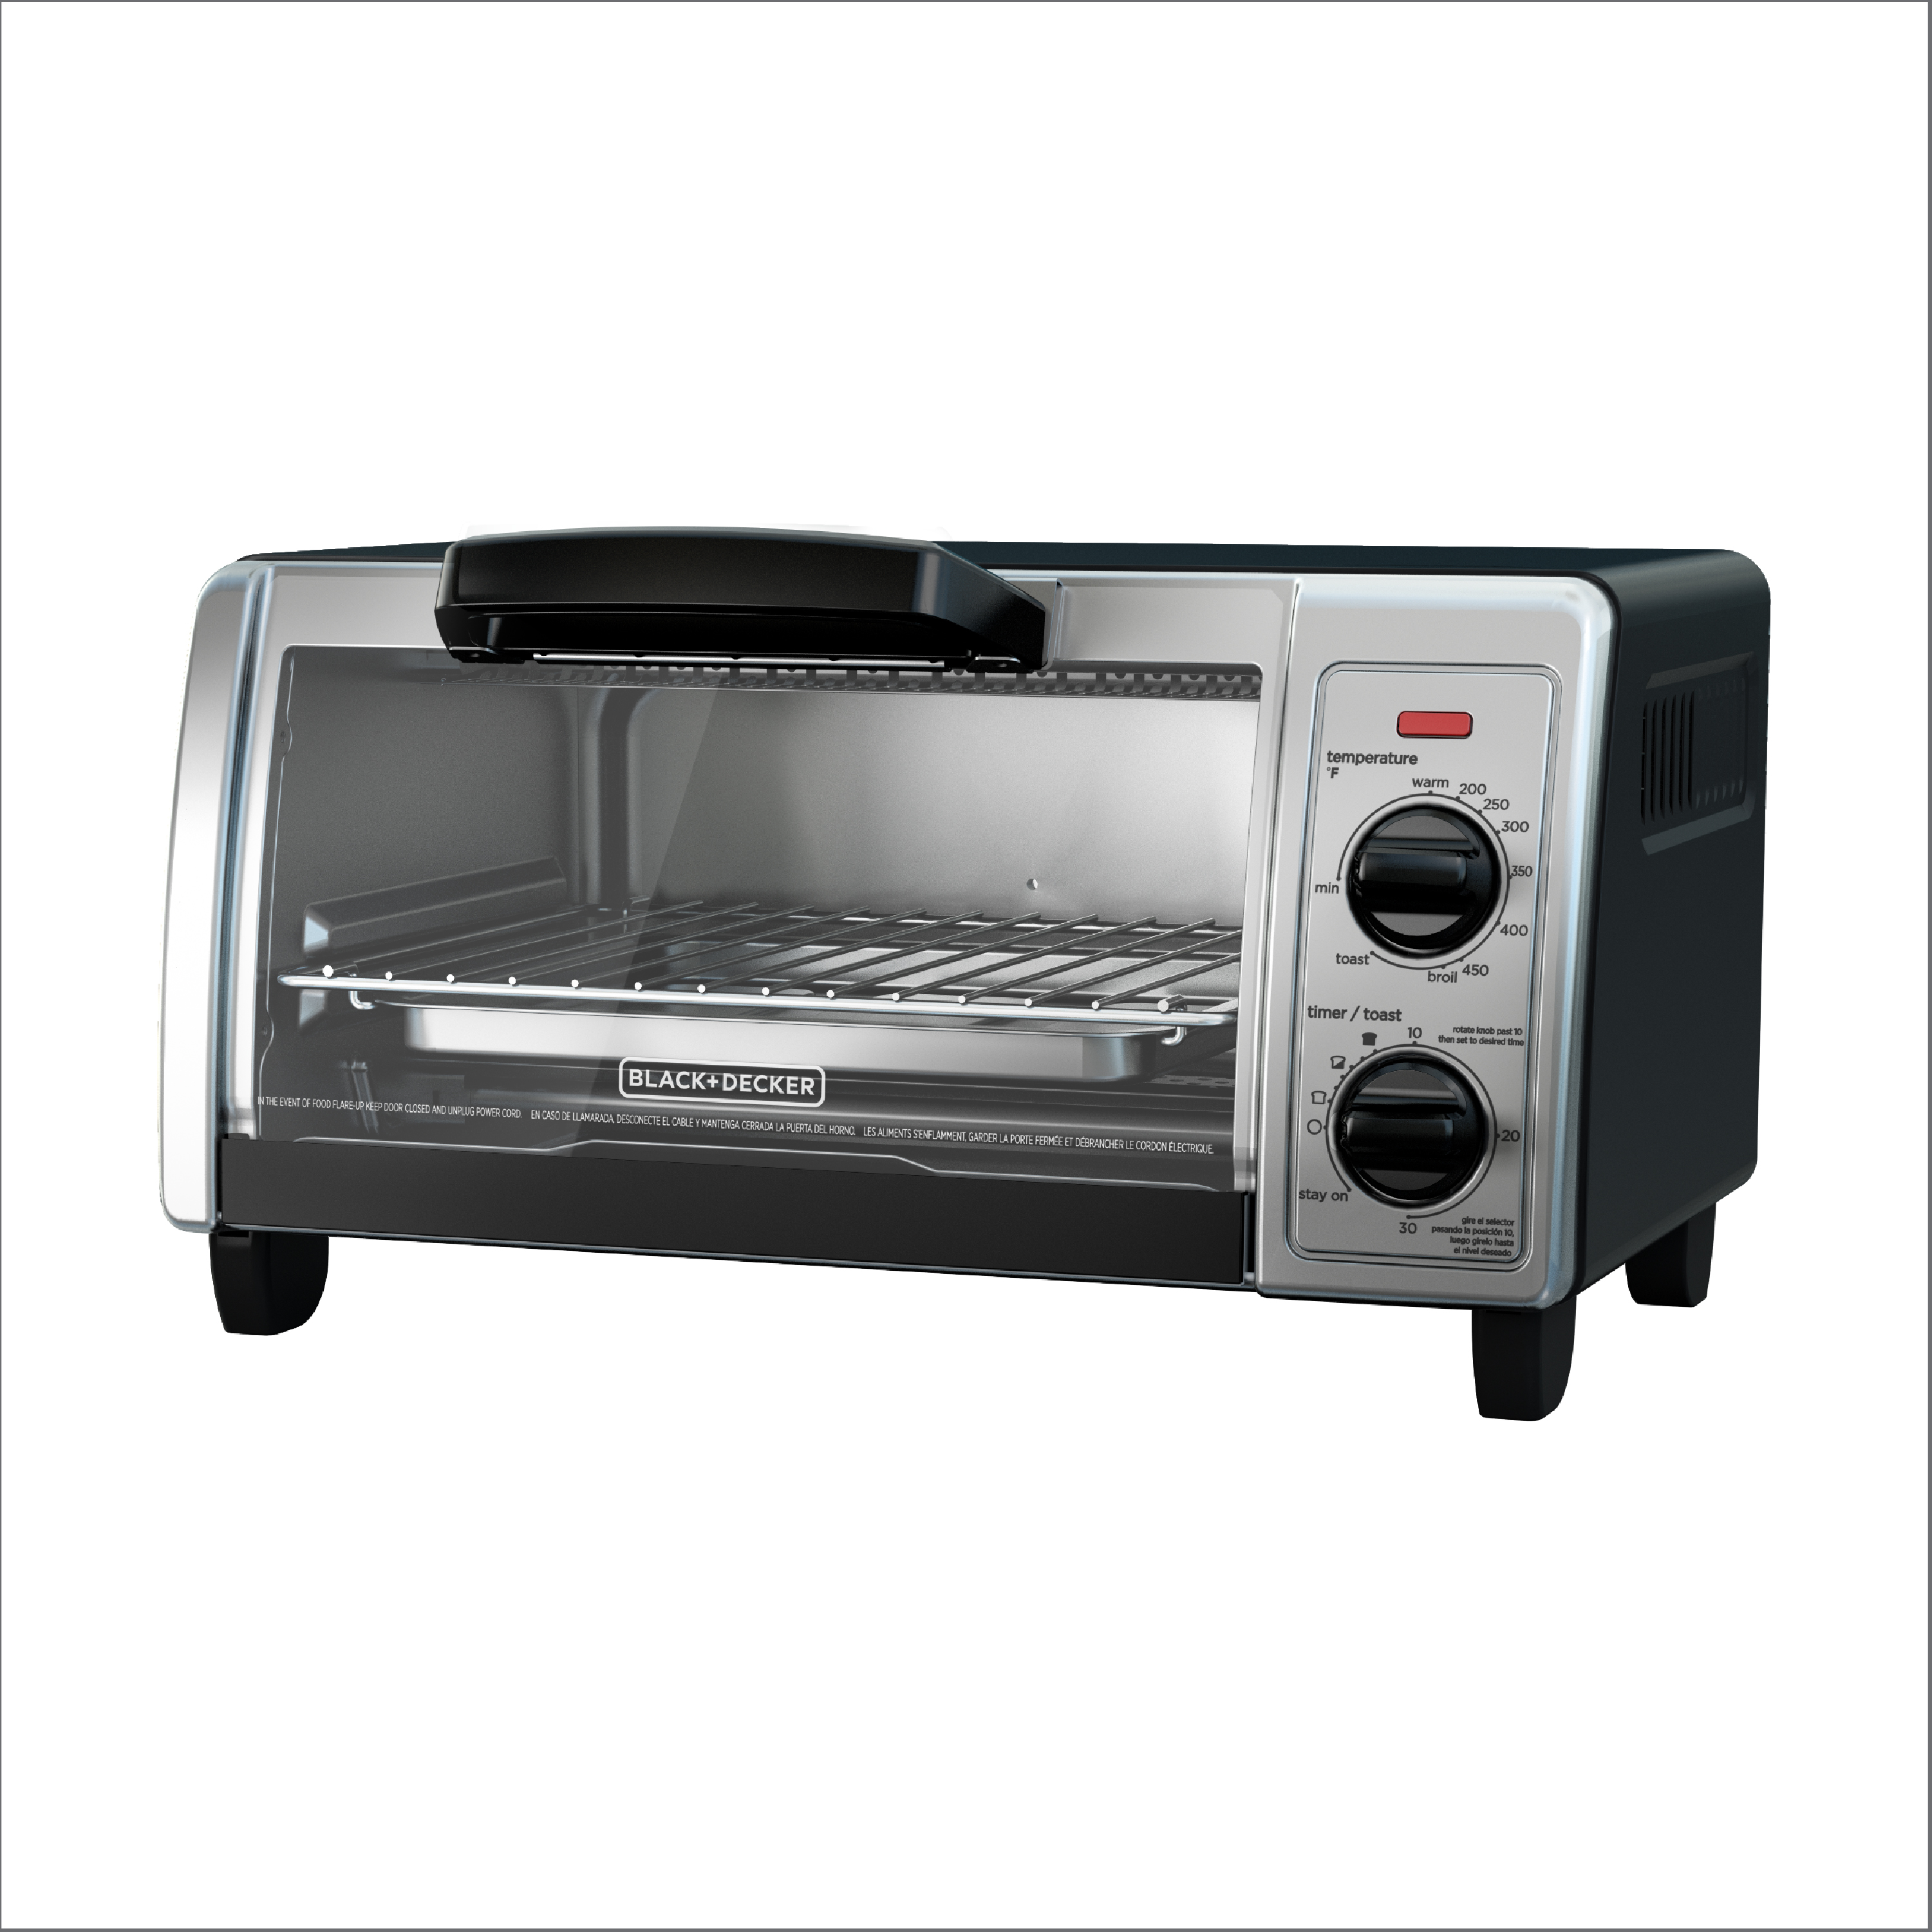 BLACK+DECKER 4-Slice Toaster Oven, Stainless Steel, TO1705SB - image 1 of 8